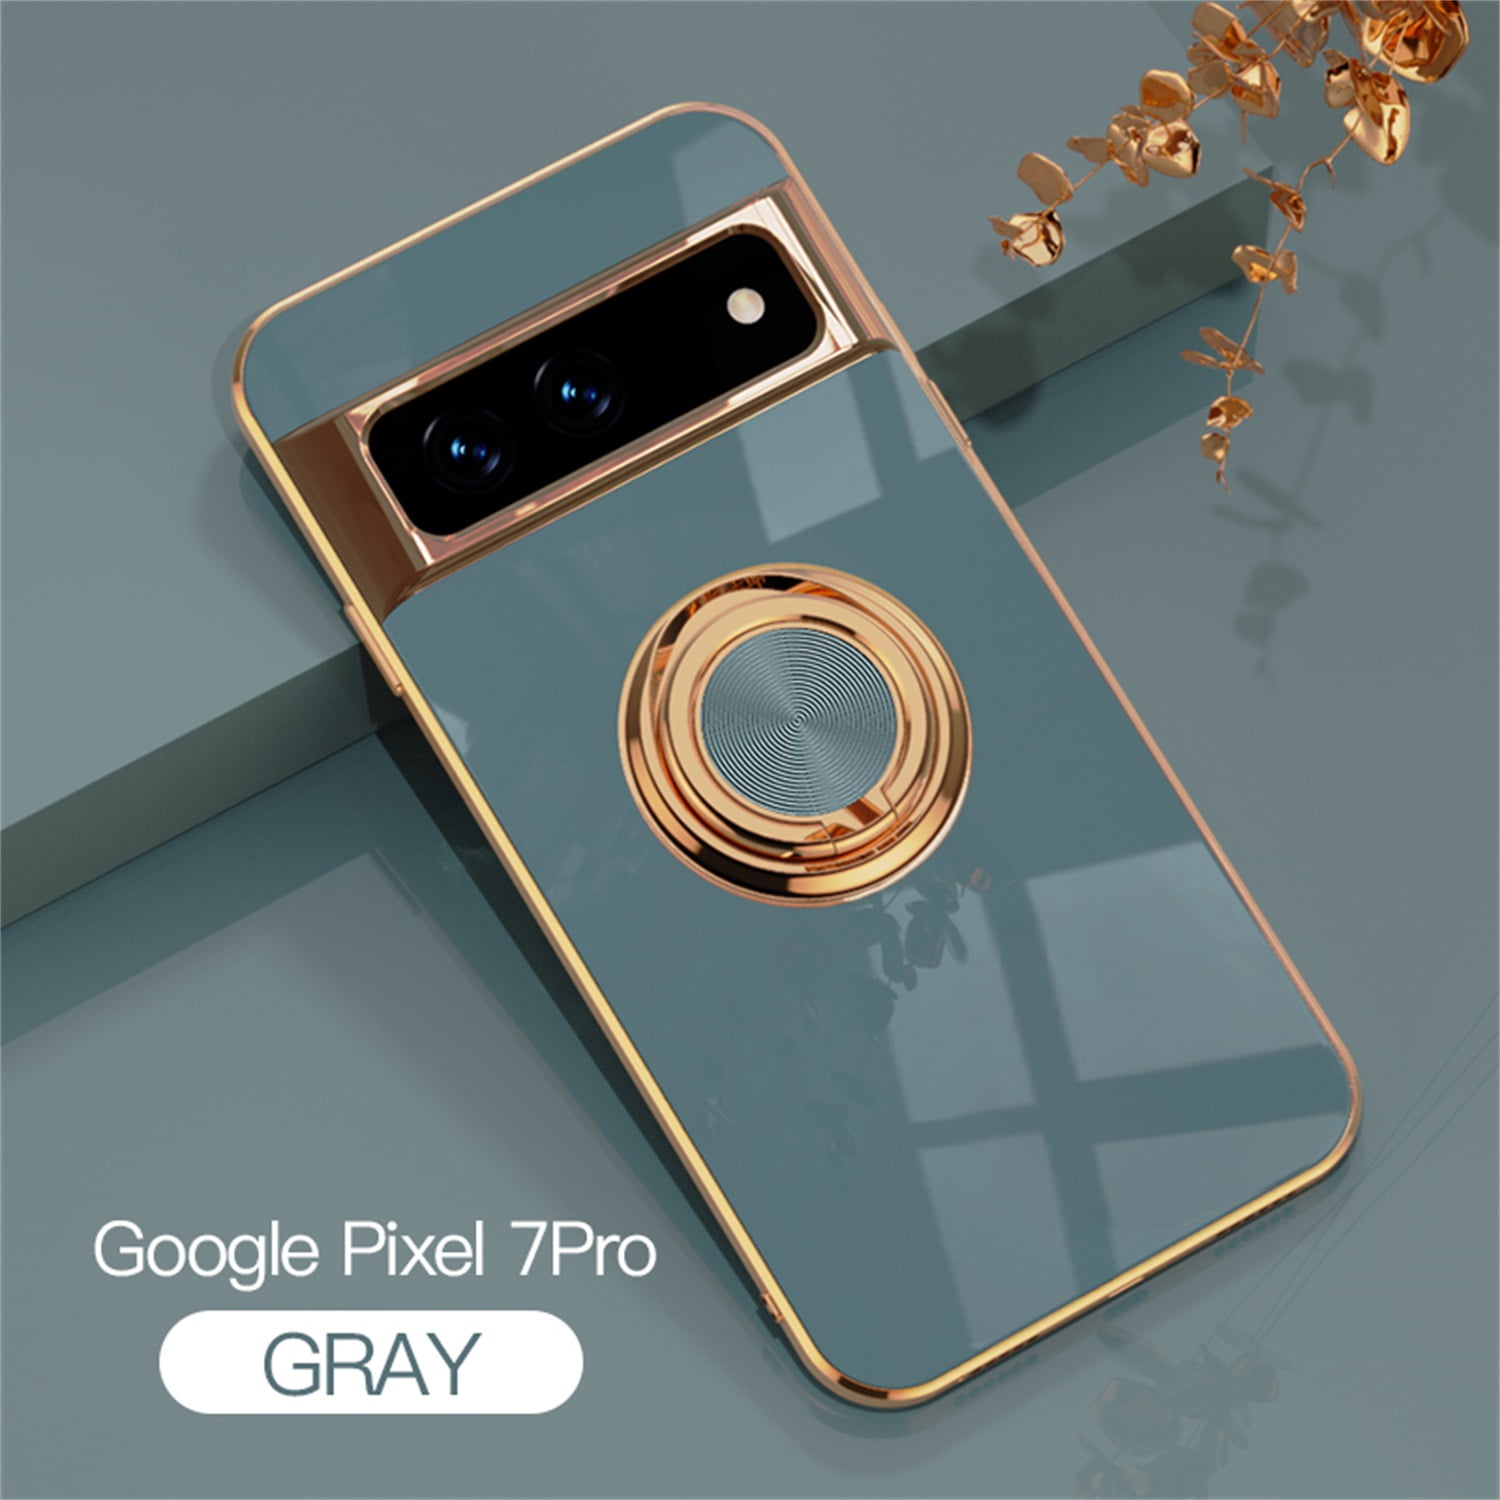  Wollony for Google Pixel 7 Pro Square Leather Case with  Kickstand Ring Stand Metal Edge Shockproof Protective Case Retro Luxury  Fashion Cover for Women Girls Soft TPU Case for Google Pixel